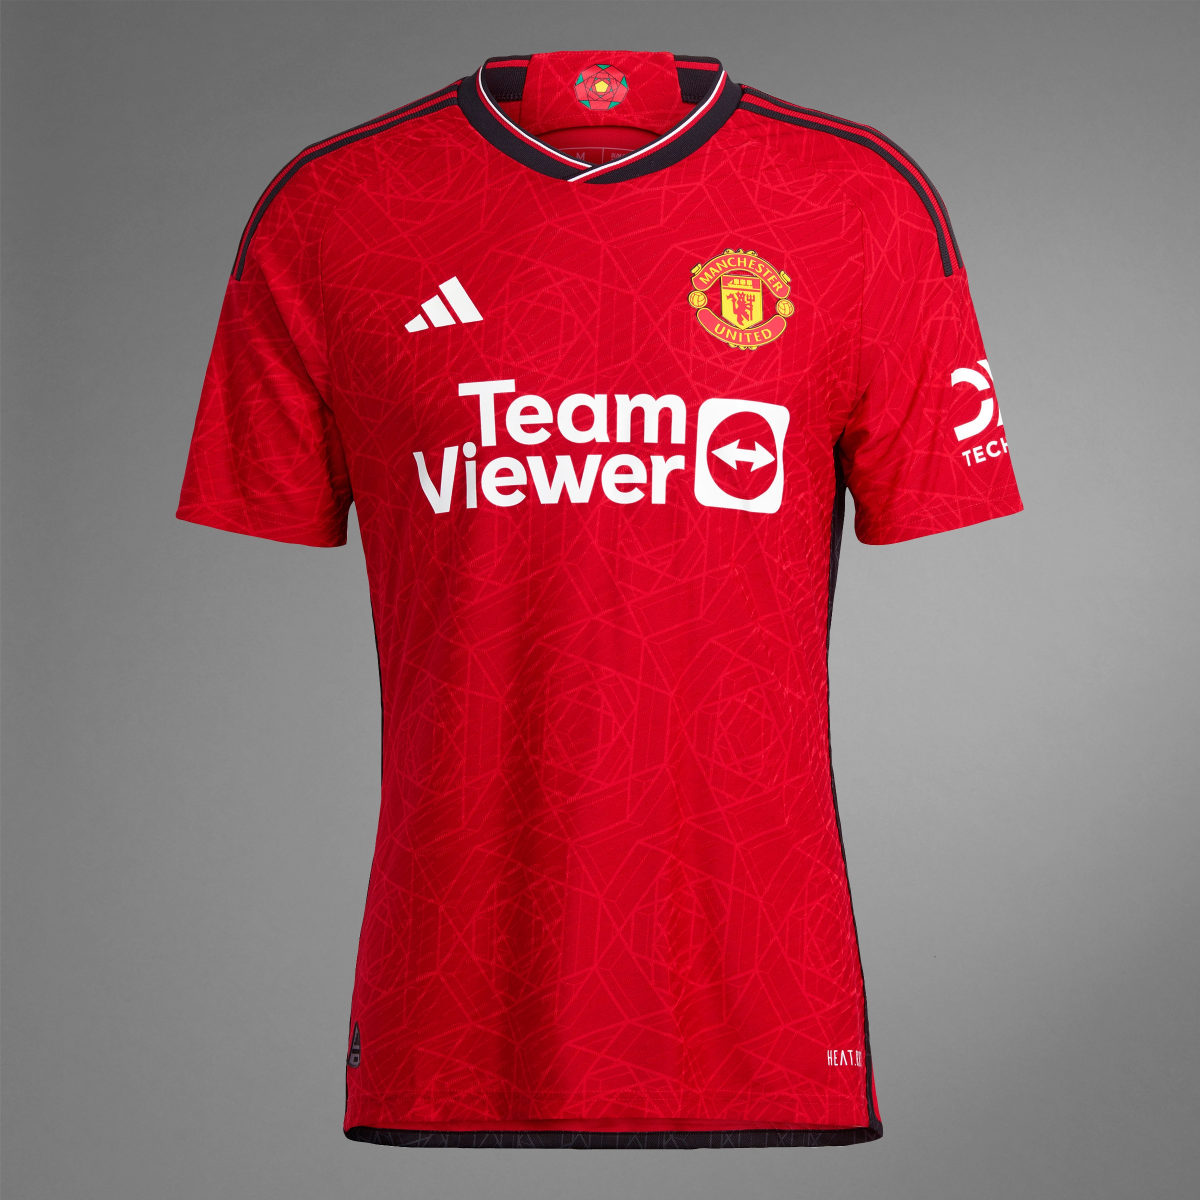 Adidas Jersey Local Manchester United 23/24 Authentic. 11